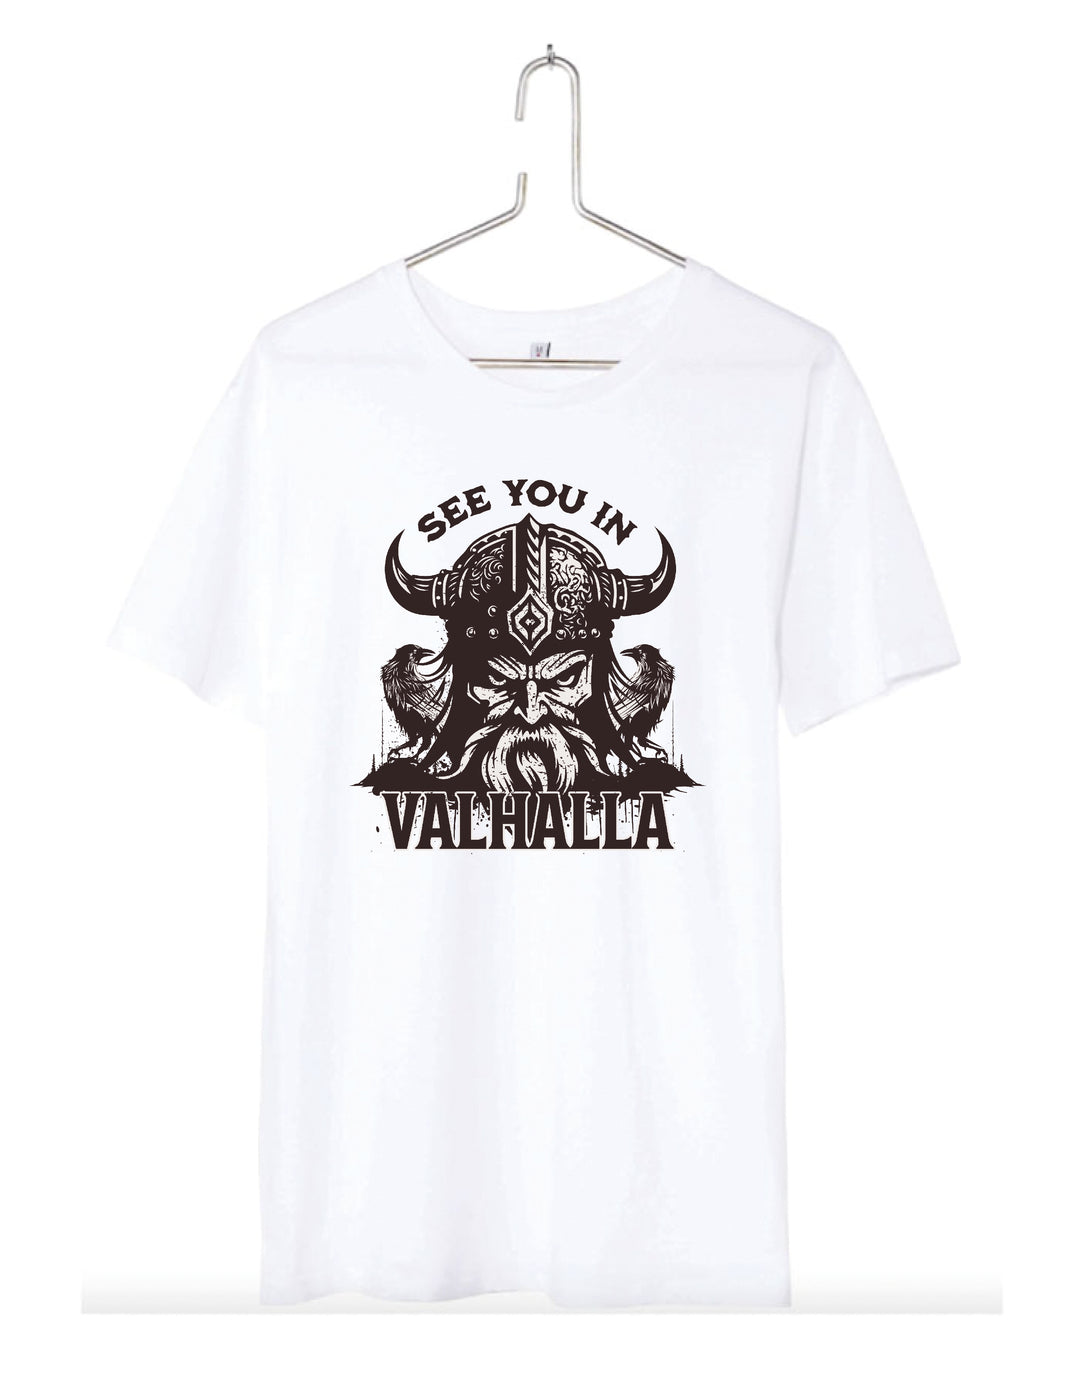 T-Shirt homme See you in Valhalla